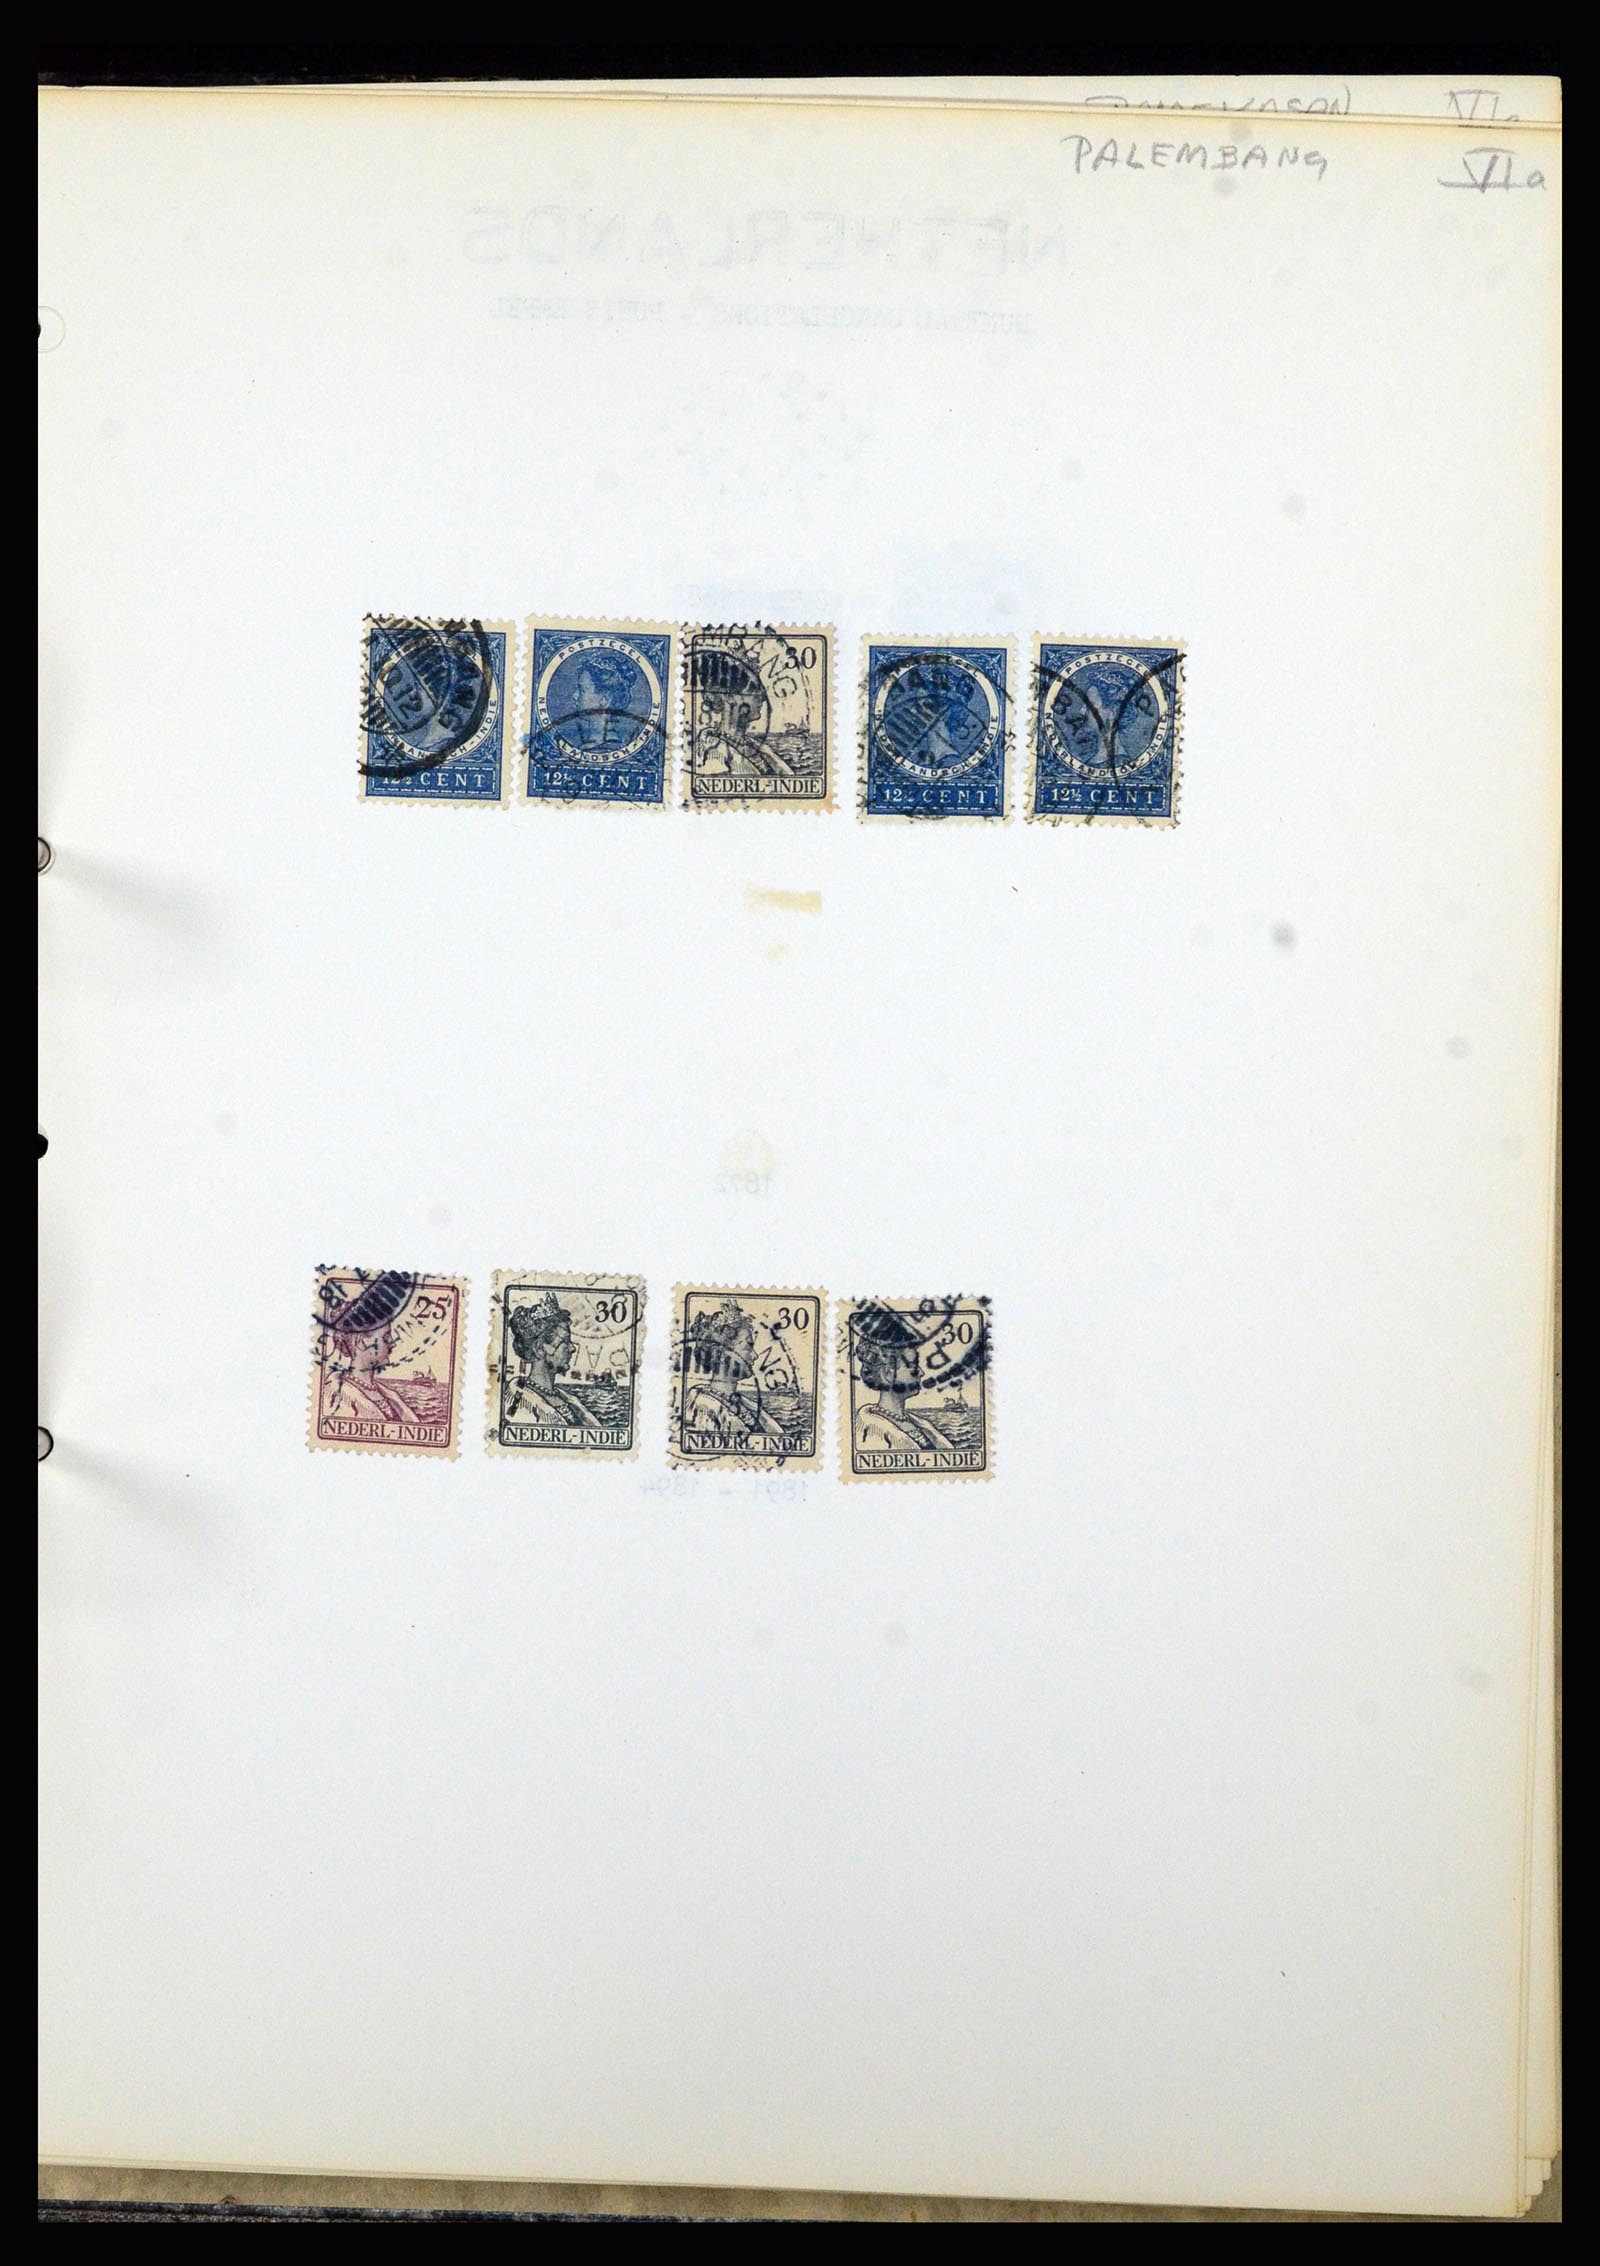 36841 081 - Stamp collection 36841 Dutch east Indies short bar cancels.